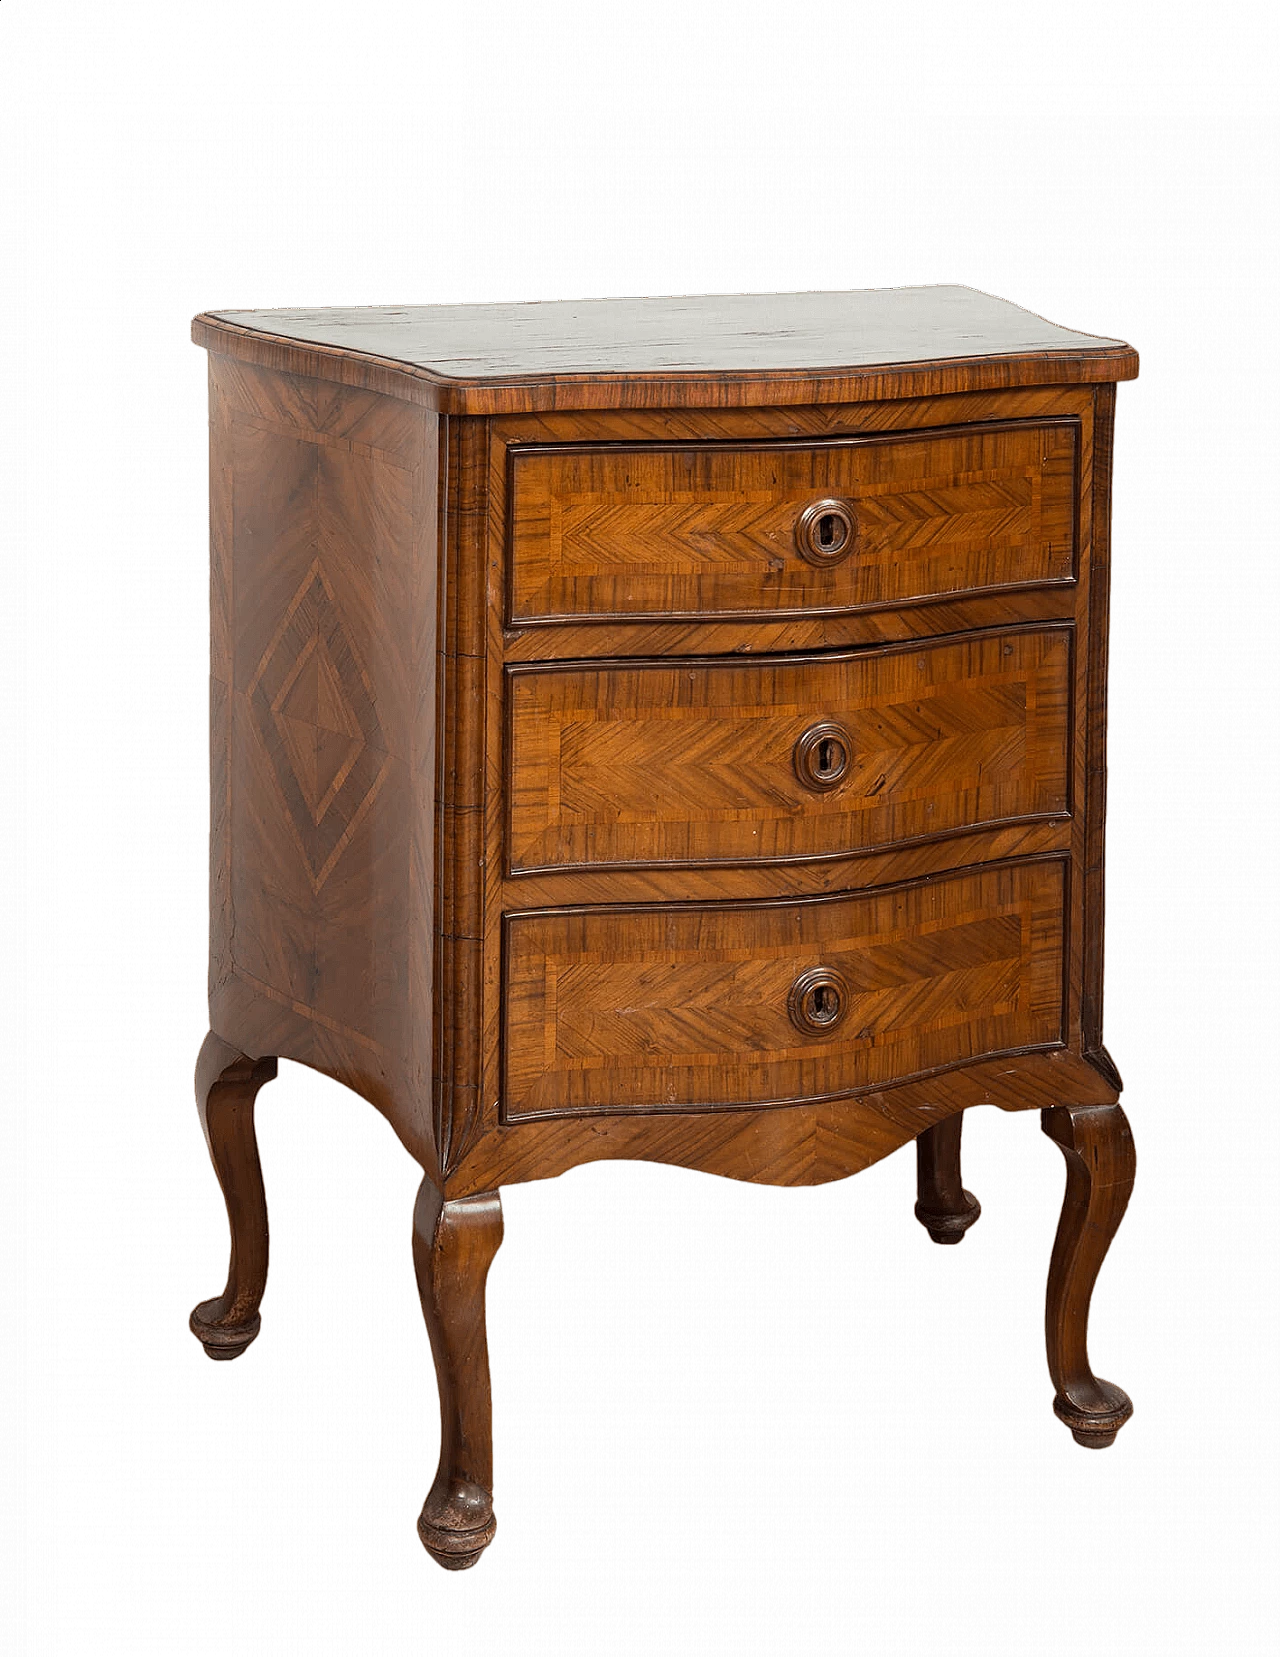 Neapolitan Louis XIV walnut-root bedside table with inlays, 18th century 5